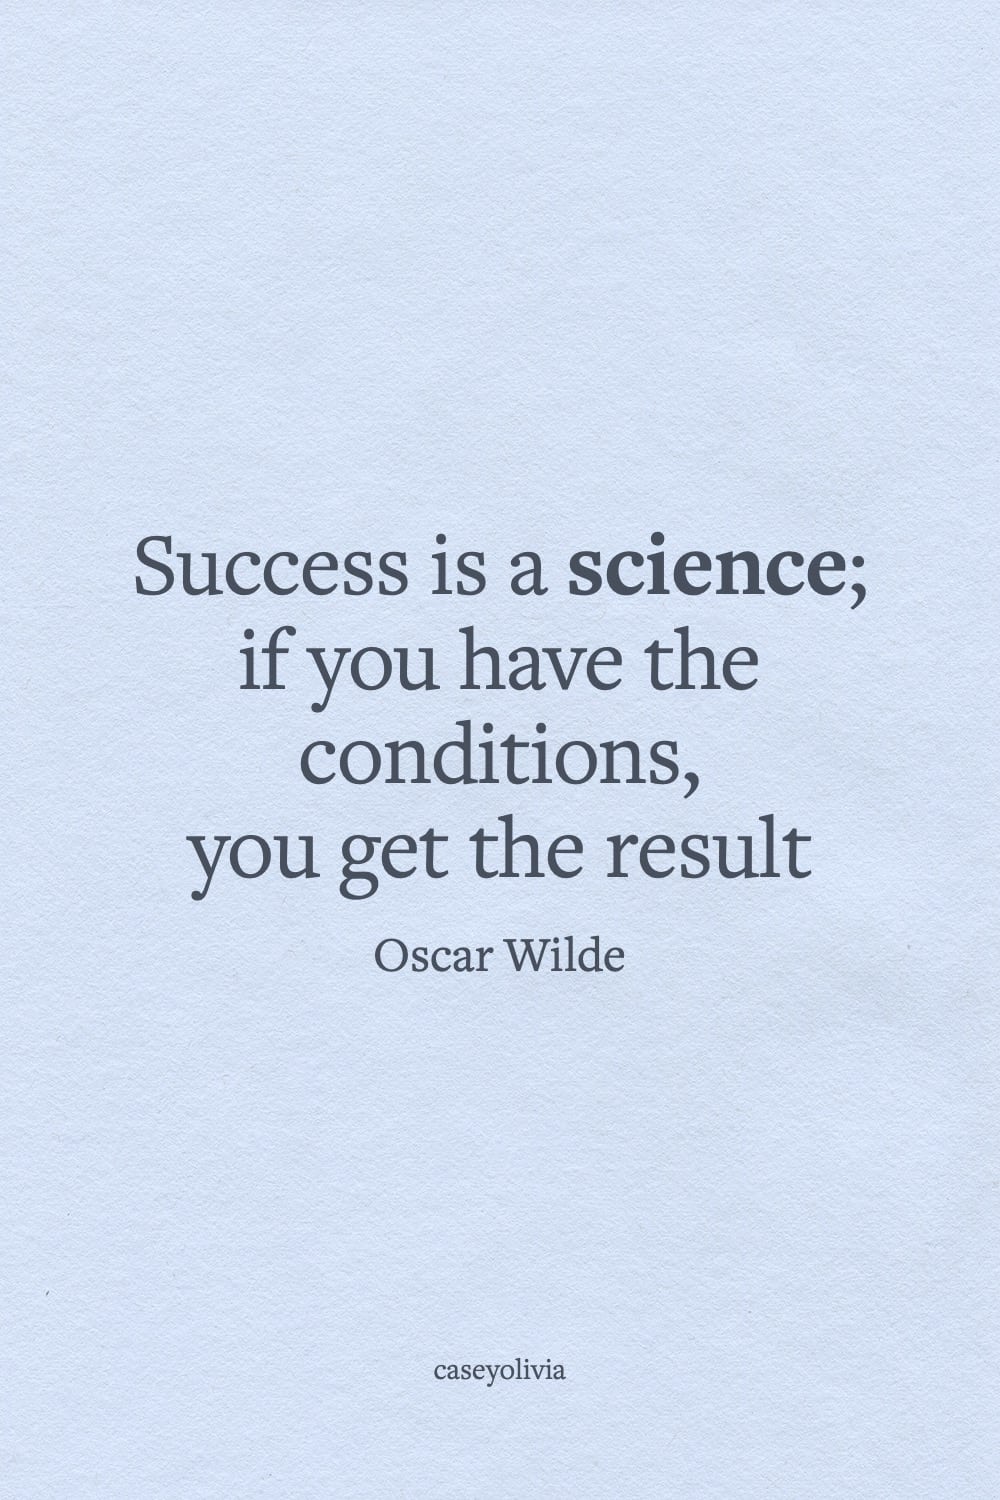 success is a science quote image for inspiration